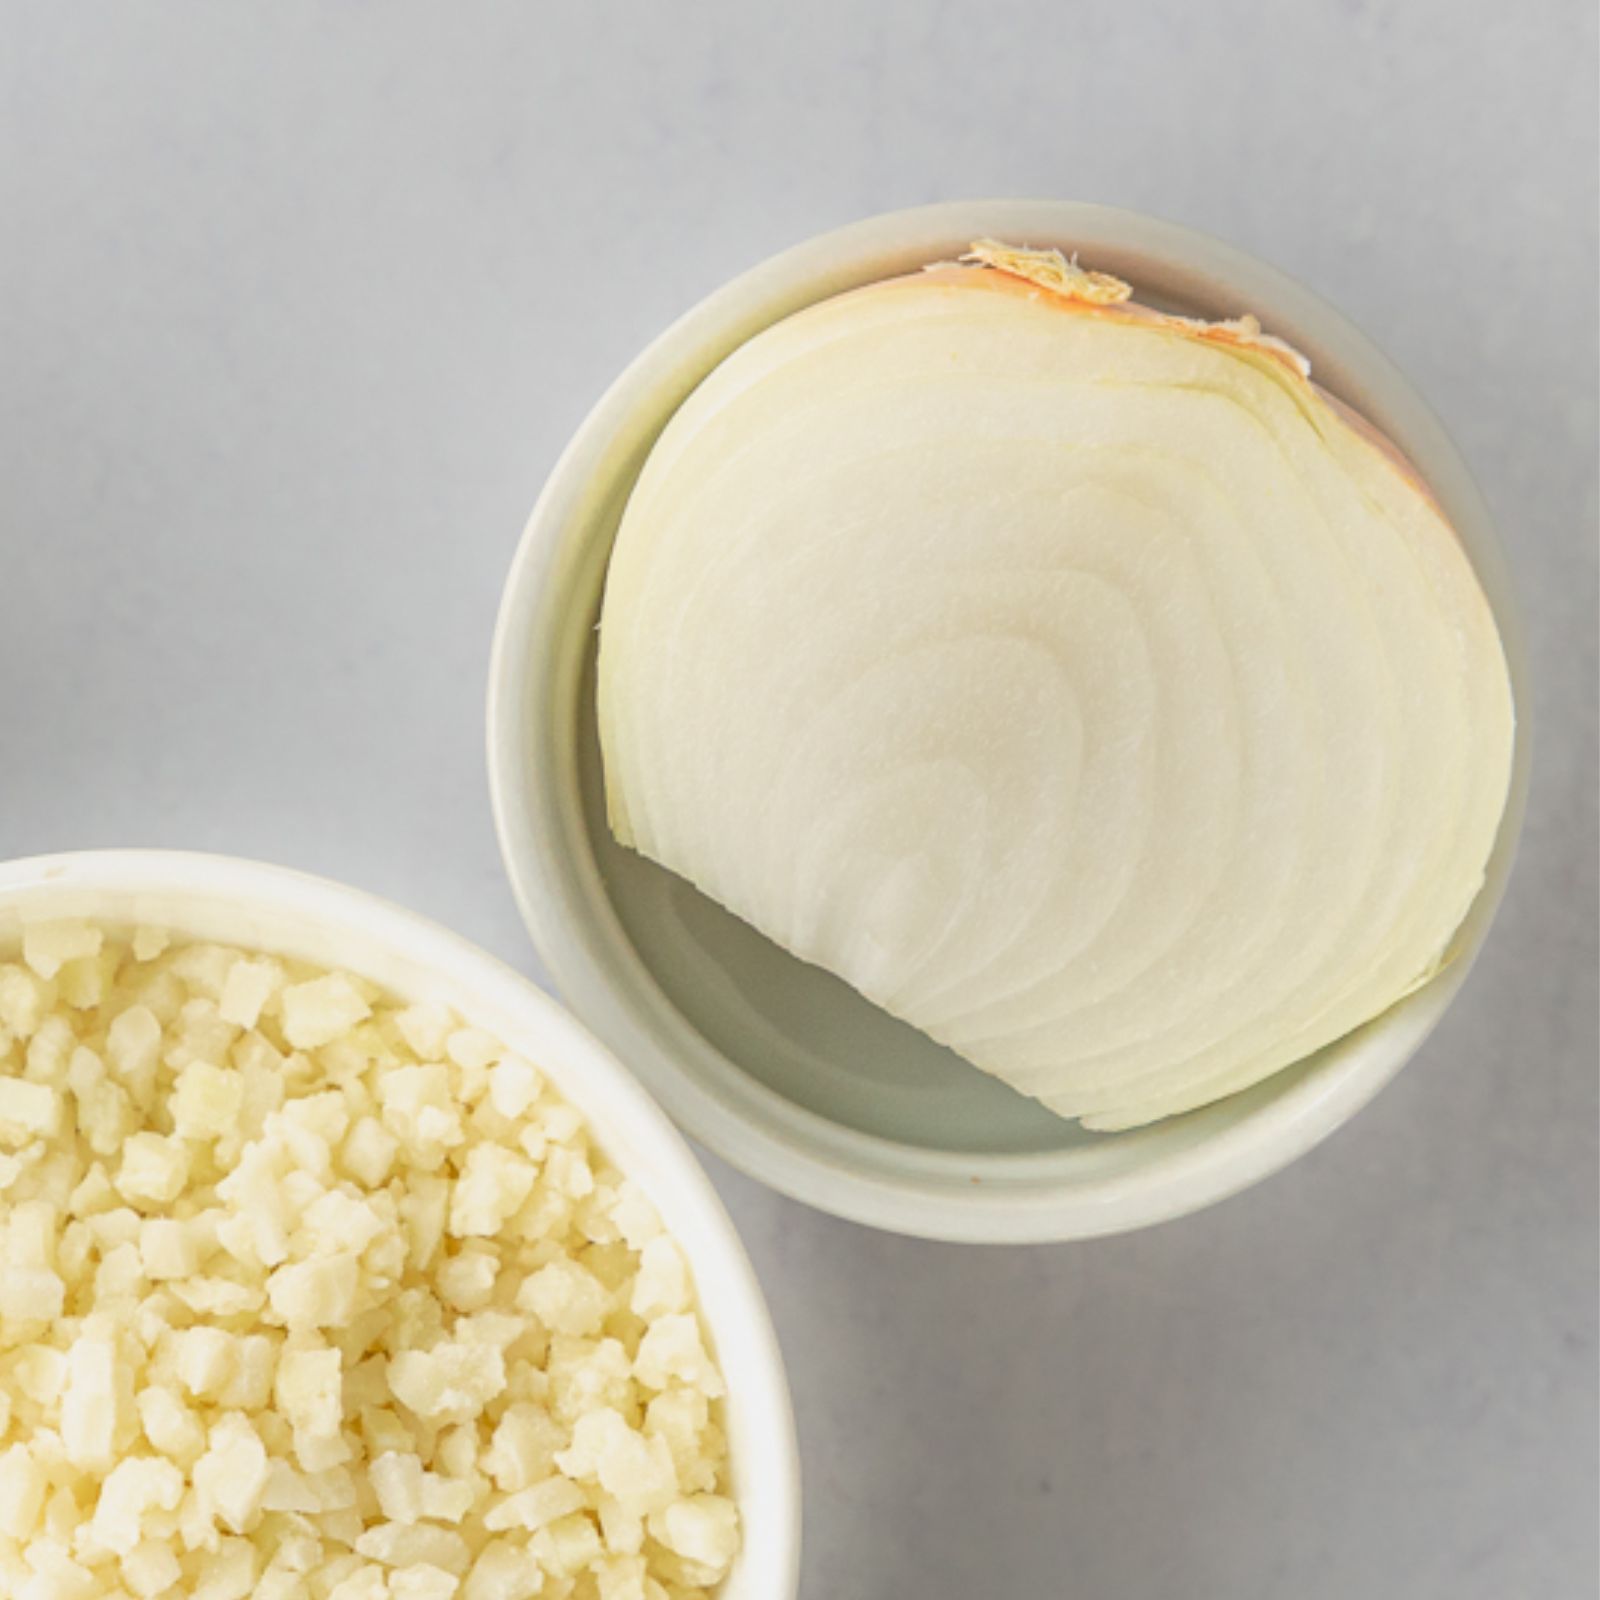 a yellow onion in a white bowl with riced frozen cauliflower out of frame in another white bowl